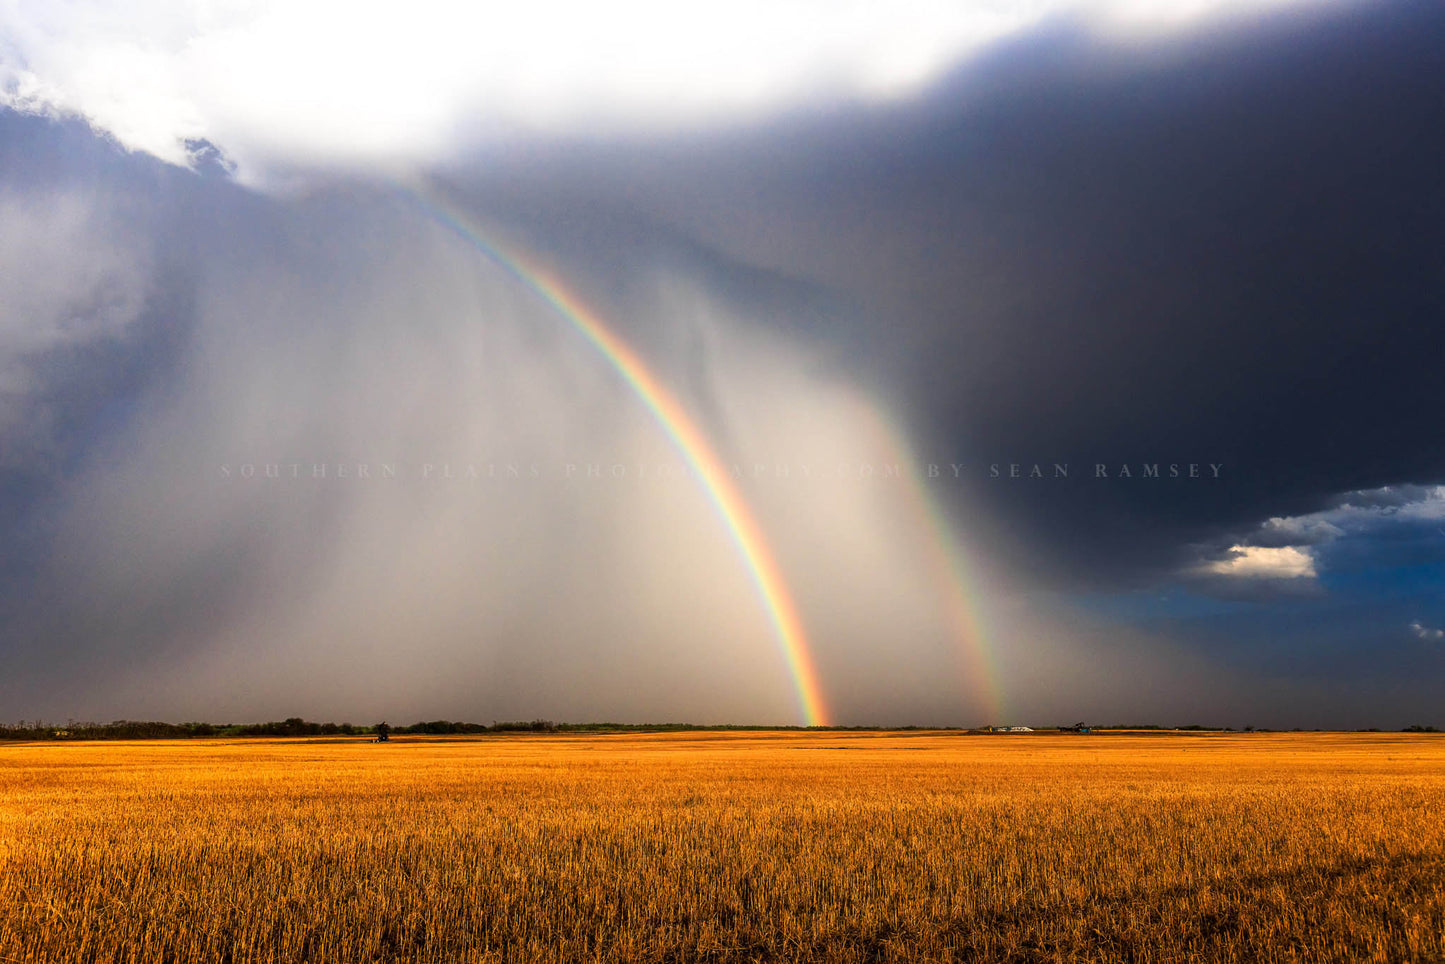 Stormy sky photography print of a brilliant double rainbow shining from a thunderstorm over a golden wheat field on an autumn day in Texas by Sean Ramsey of Southern Plains Photography.